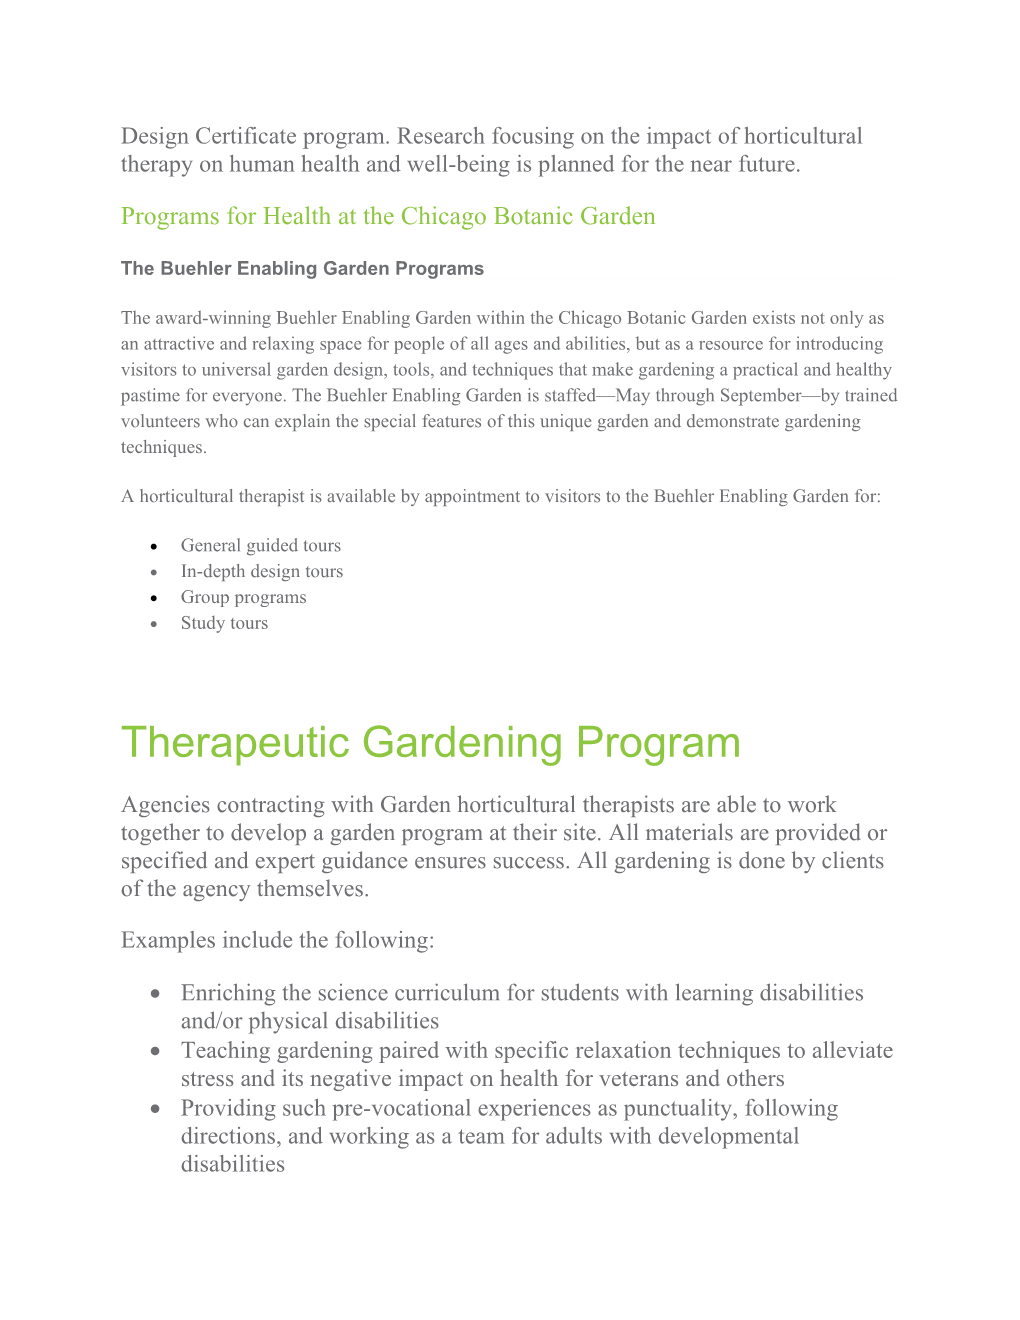 Horticultural Therapy Services at the Chicago Botanic Garden